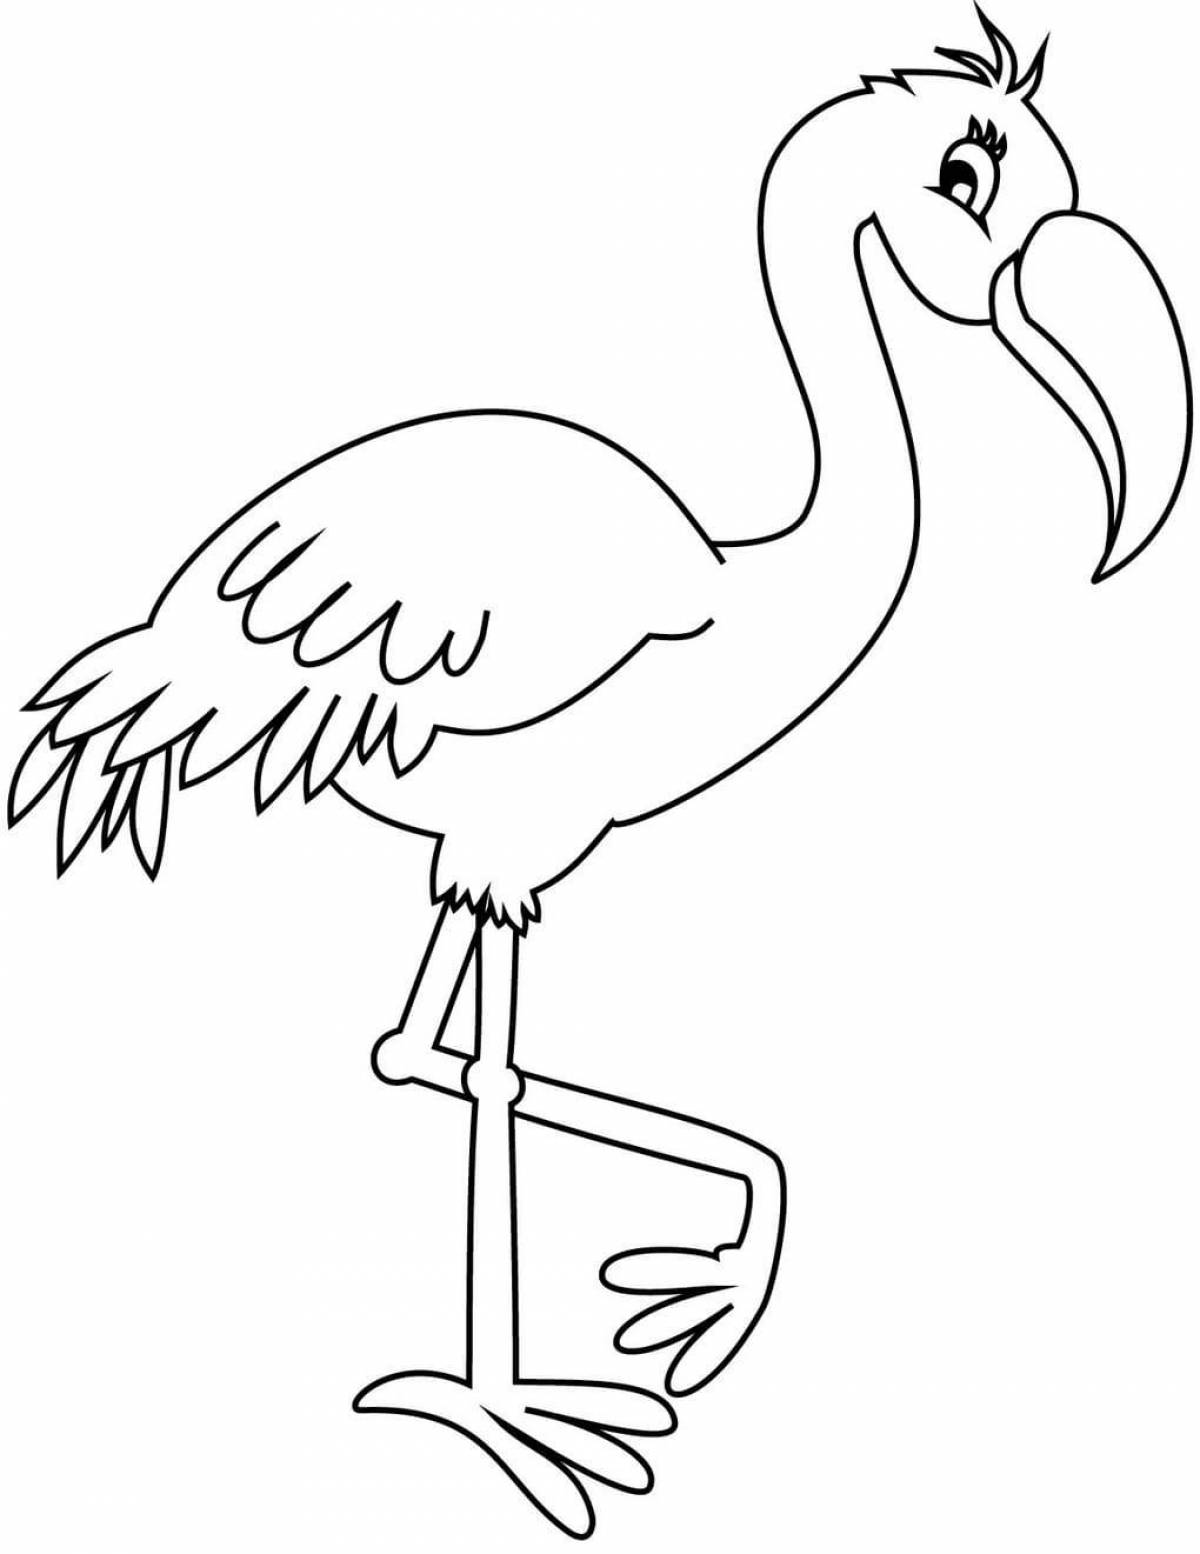 Adorable flamingo coloring book for kids